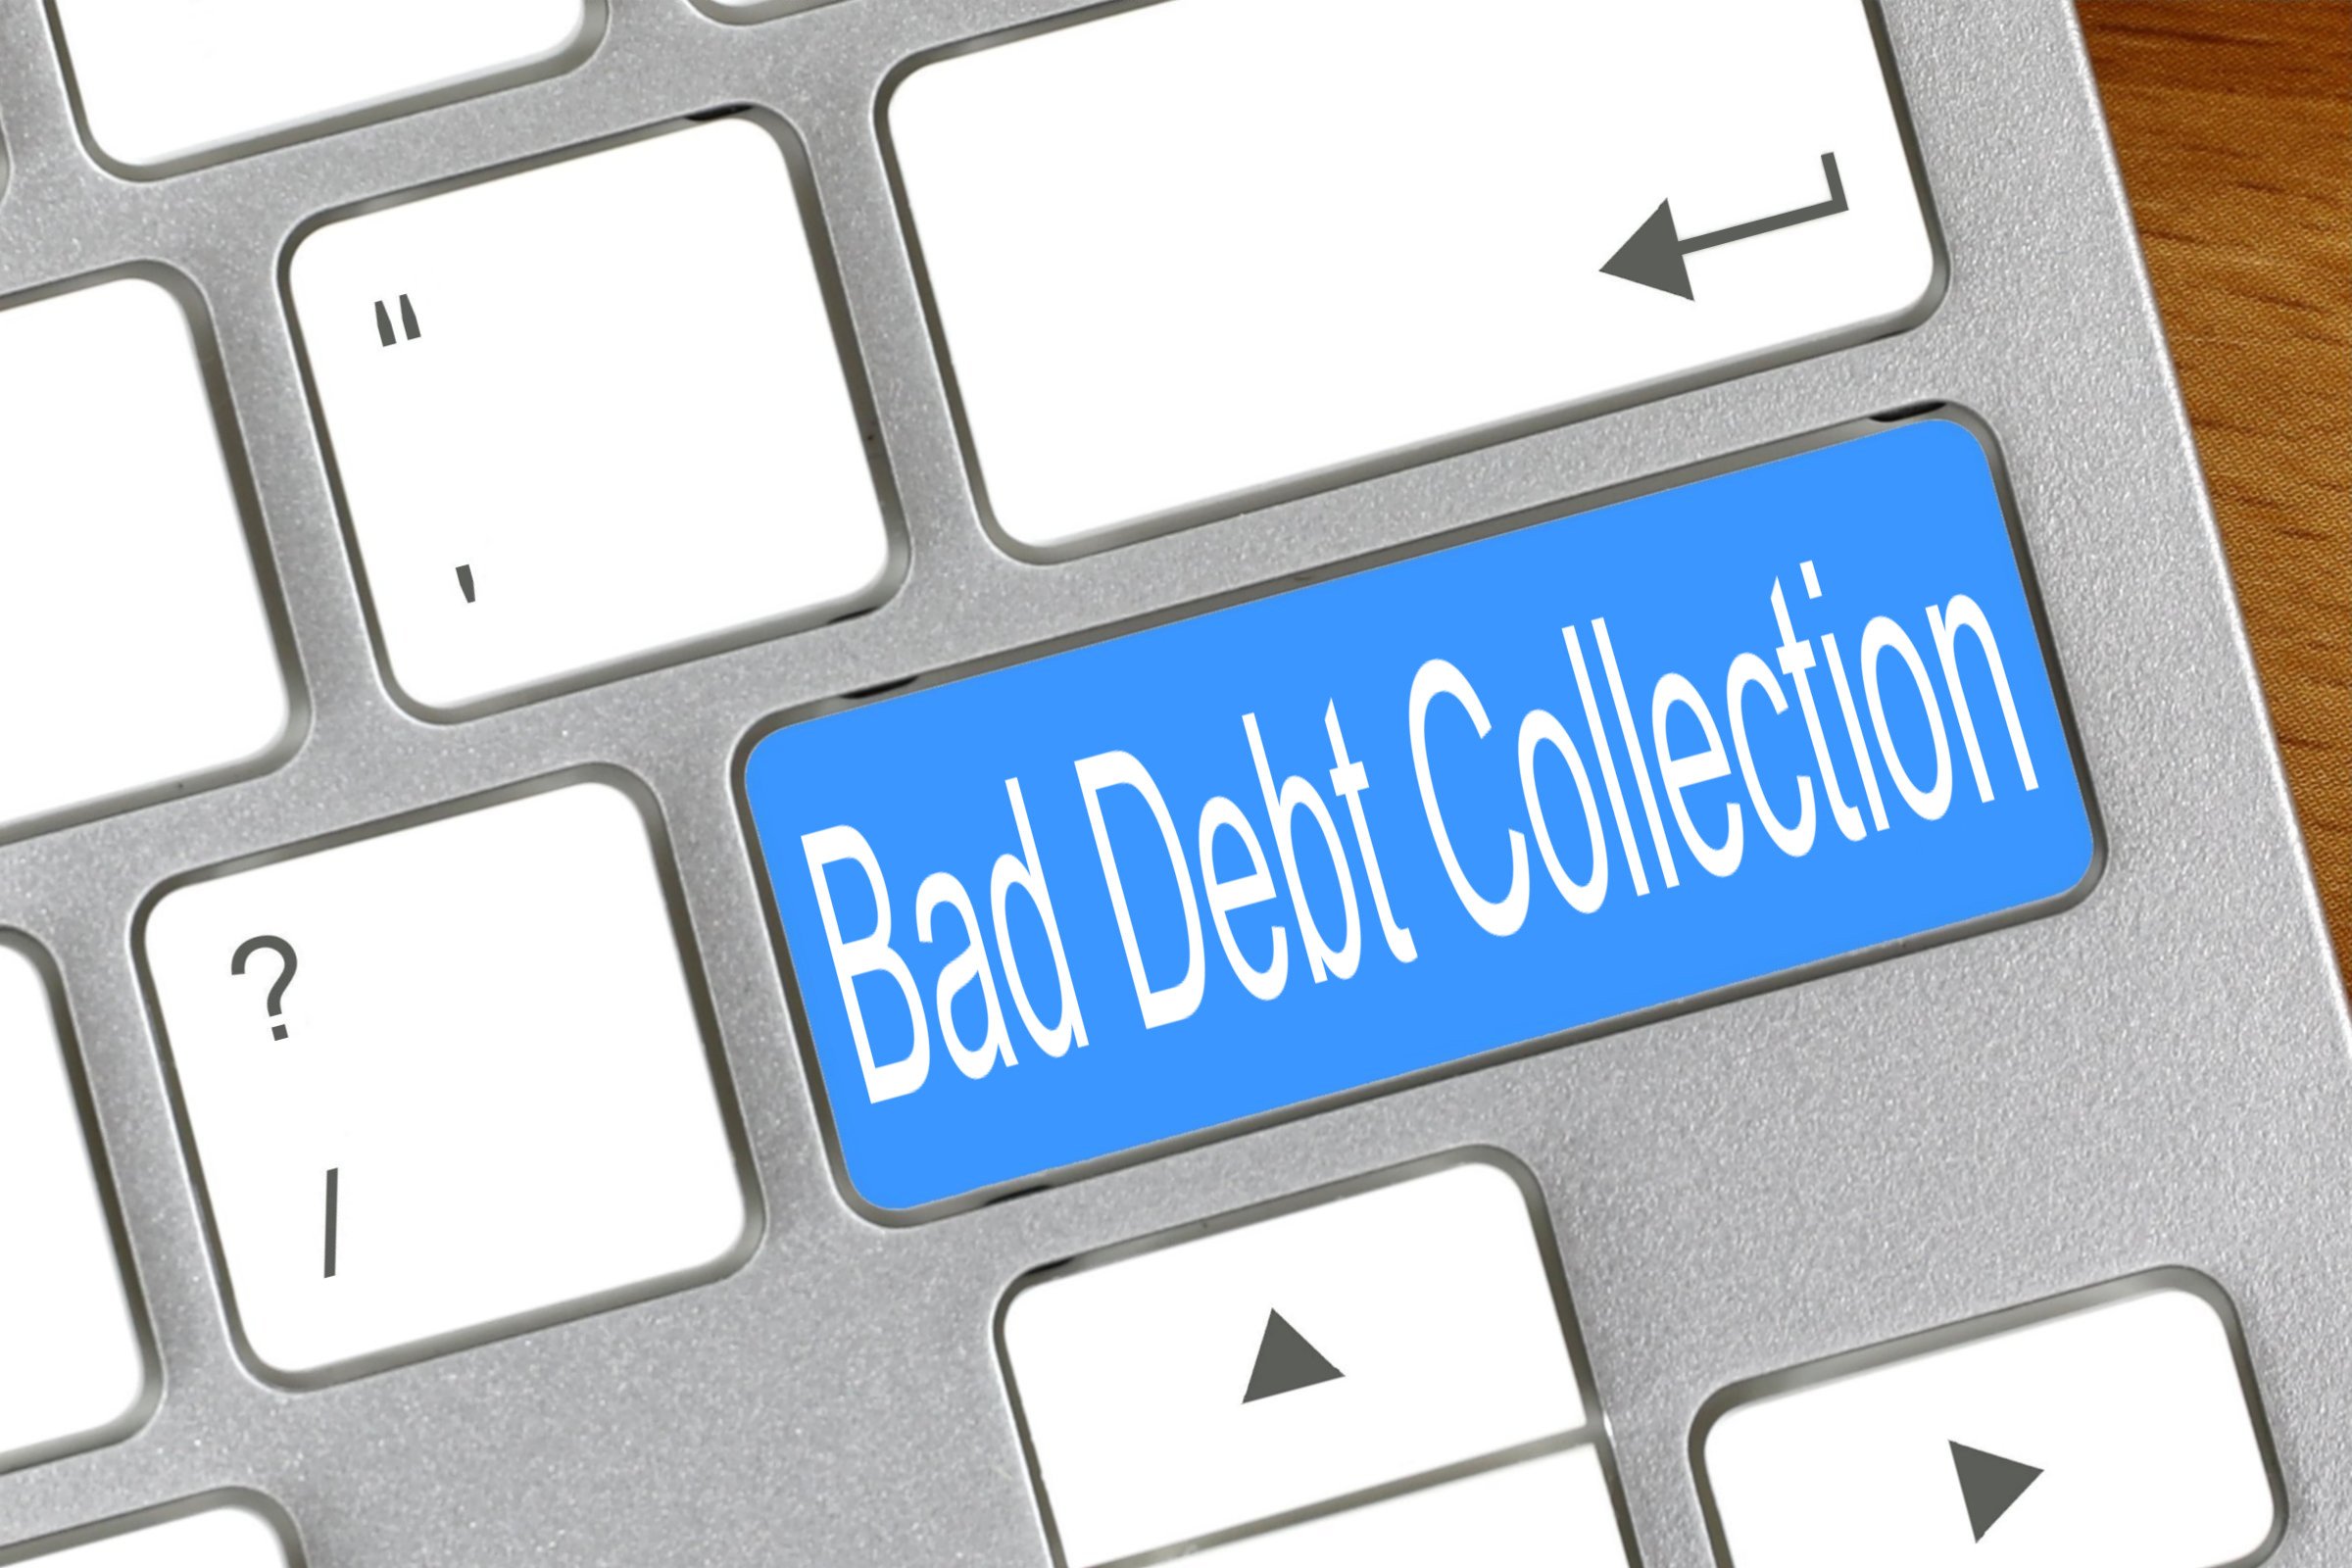 bad debt collection